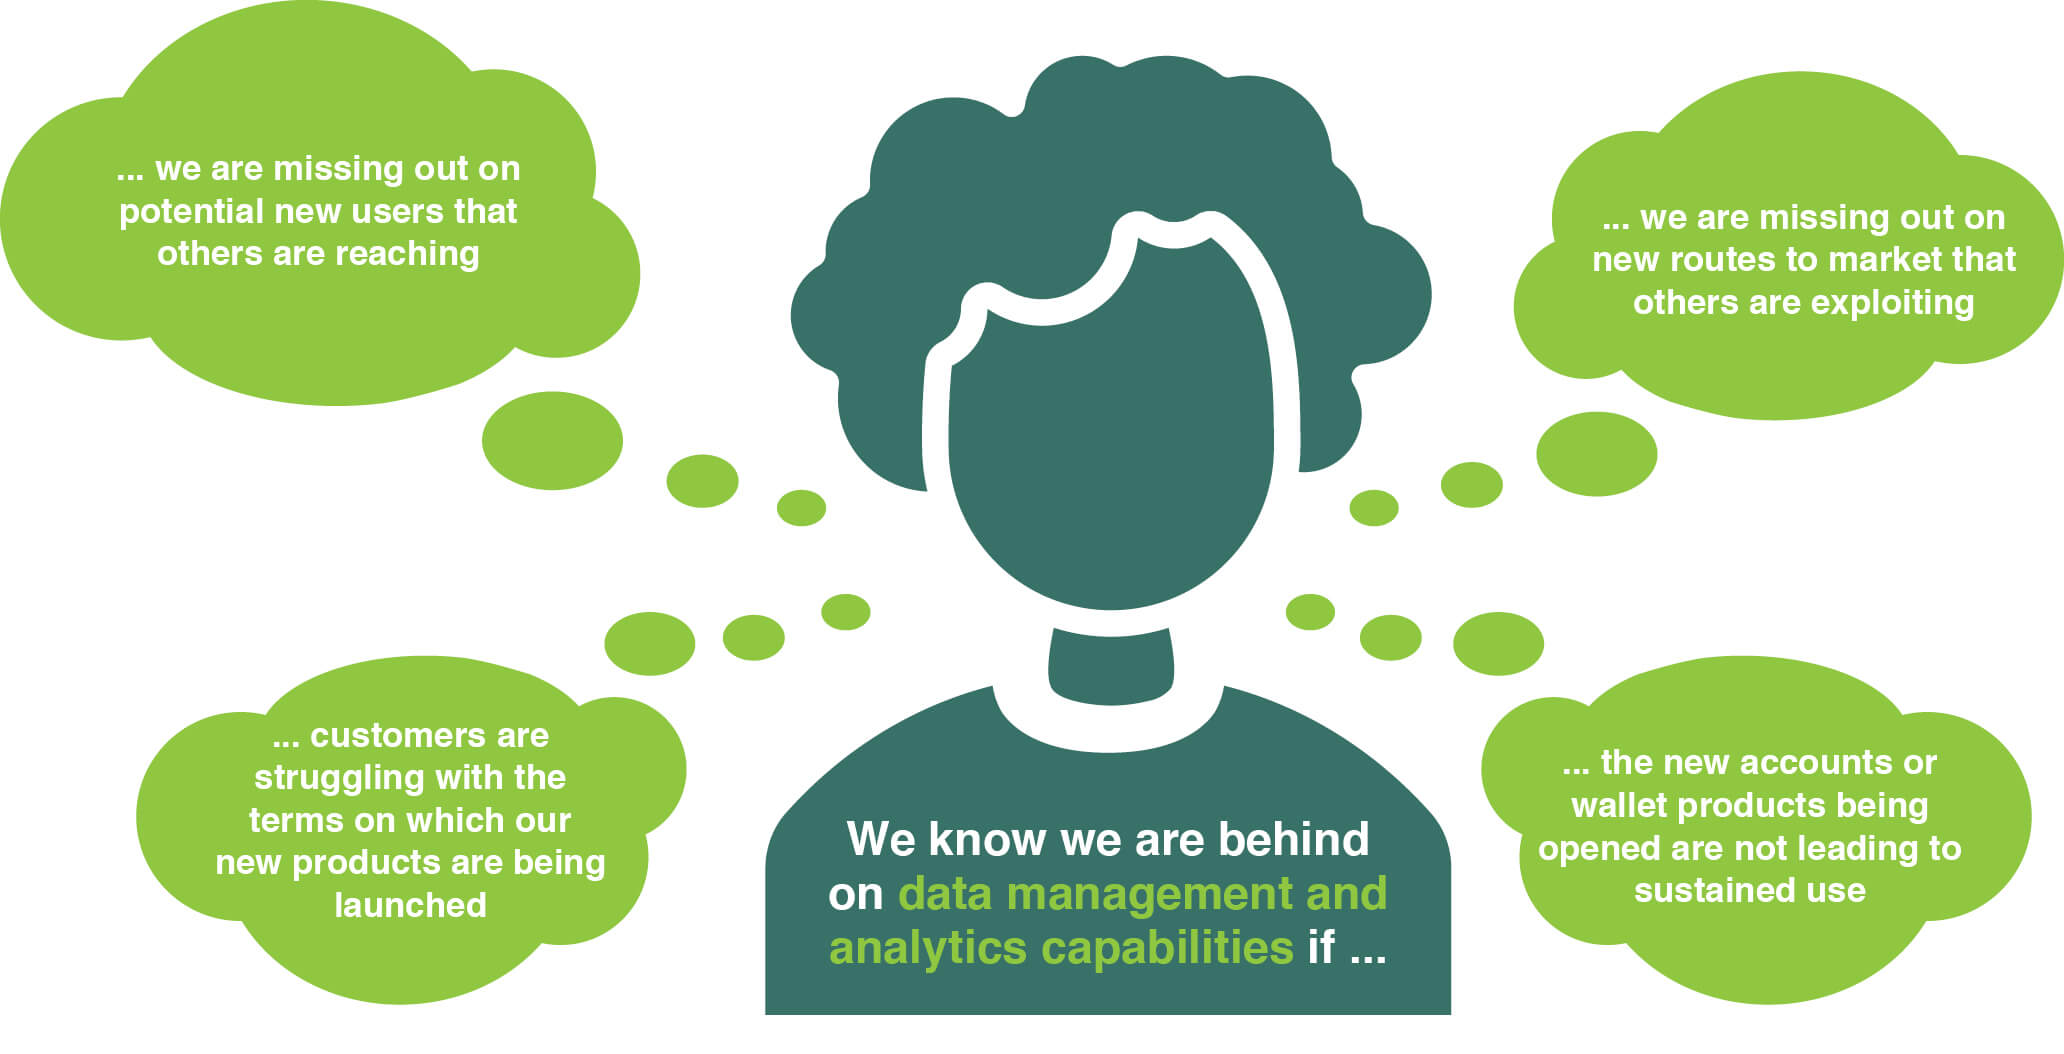 Graphic on building data management and analytics capabilities